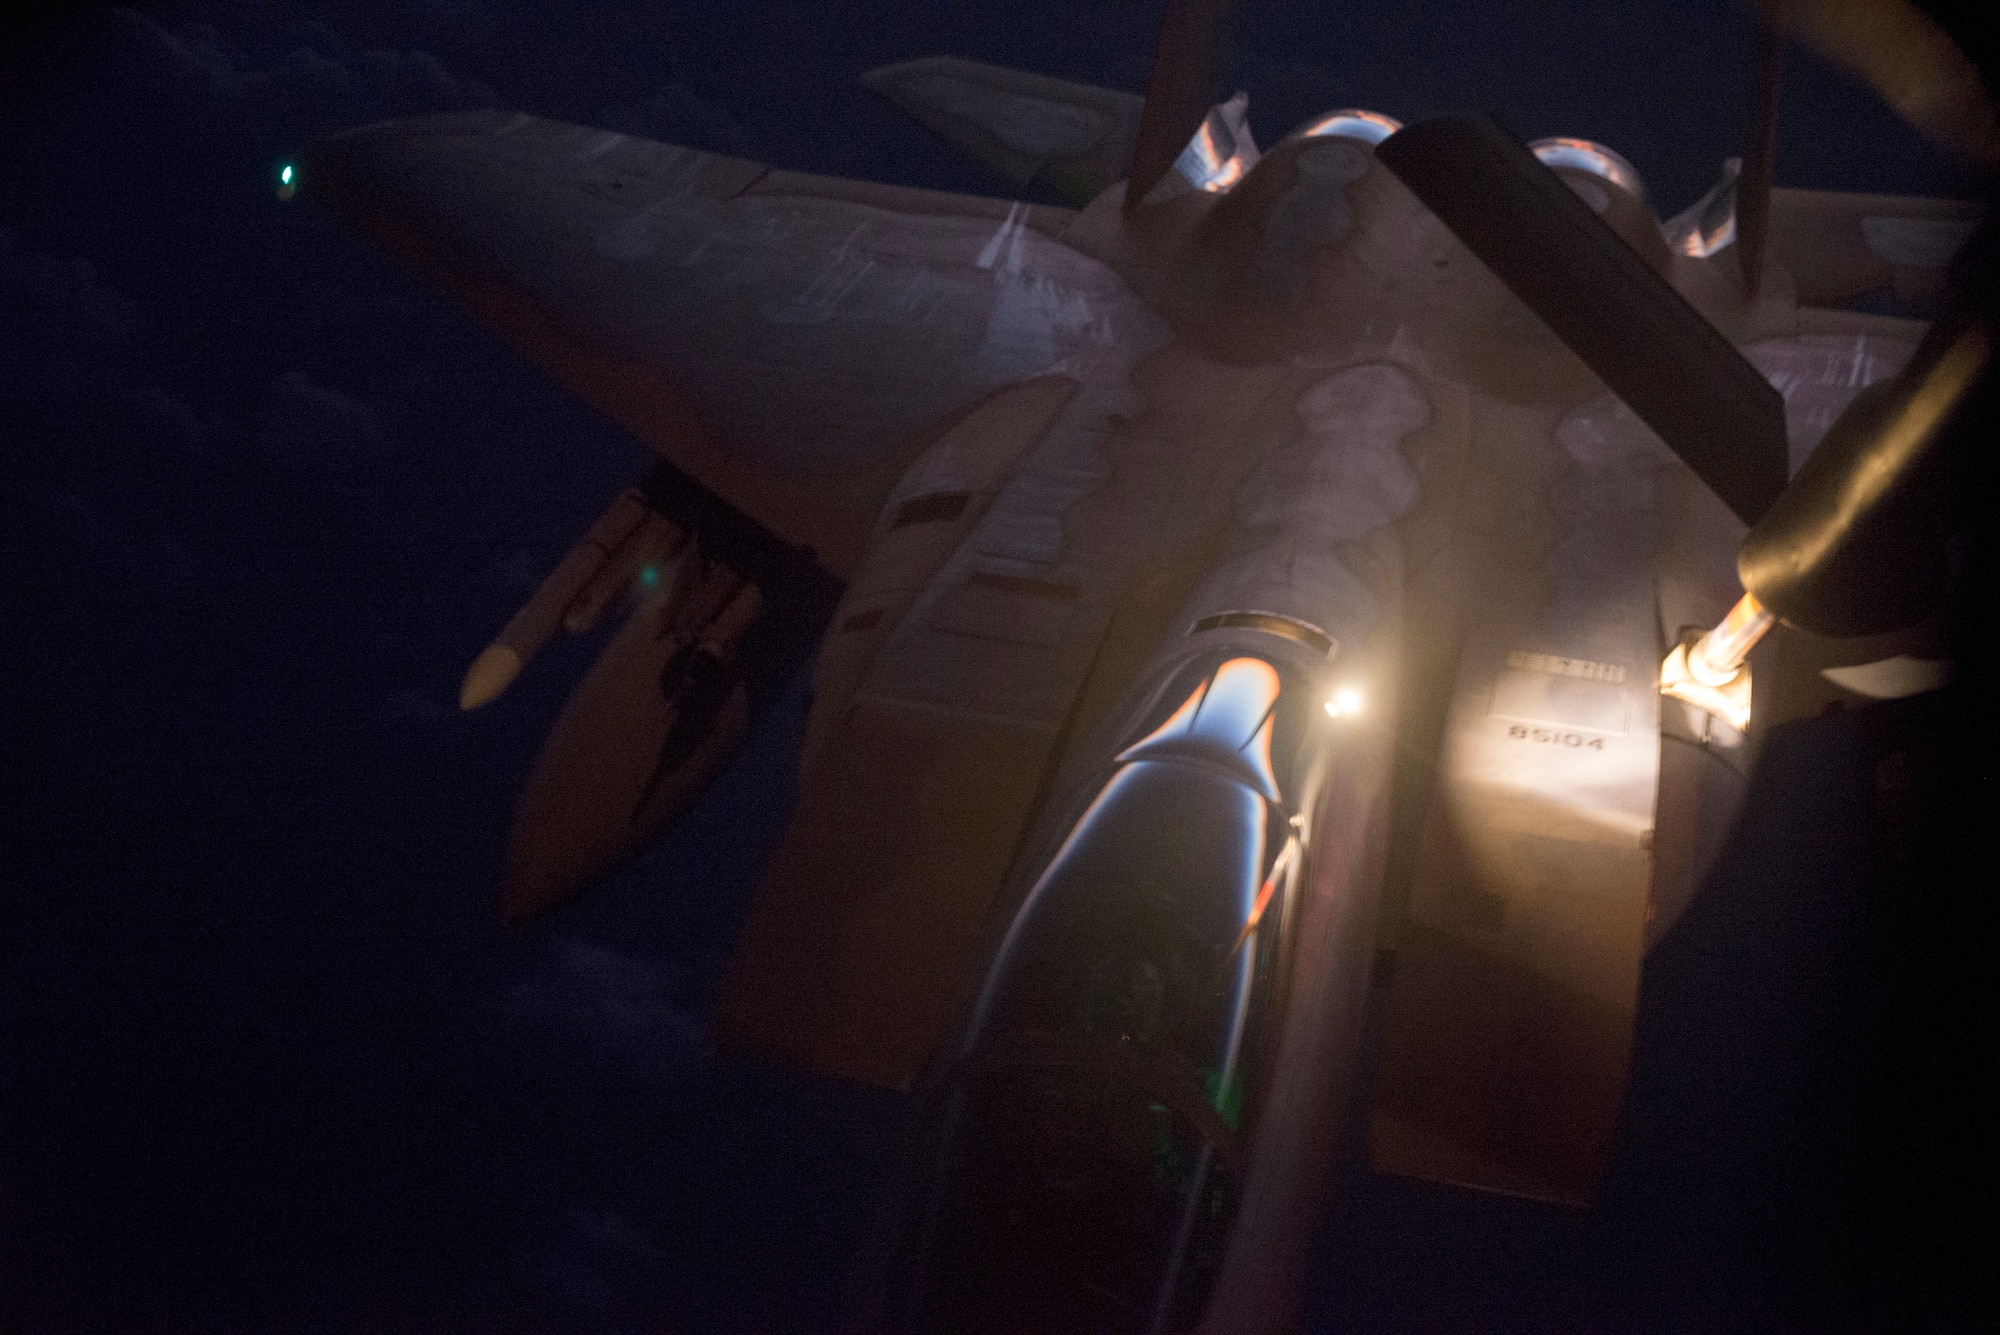 A U.S. Air Force F-15C Eagle refuels from a 909th Air Refueling Squadron KC-135 Stratotanker over the ocean late at night Sept. 16, 2014. Sept. 29, 2014, marks the 35th anniversary of the F-15C's arrival to Kadena. At Kadena alone, the F-15C/D squadrons, the 67th, 44th and formerly 12th Fighter Squadrons, have earned the title of best Air Force fighter squadron of the year and the prestigious Raytheon Trophy, formerly the Hughes Trophy, nine times since the aircraft's arrival 35 years ago. (U.S. Air Force photo by Senior Airman Maeson L. Elleman/Released)